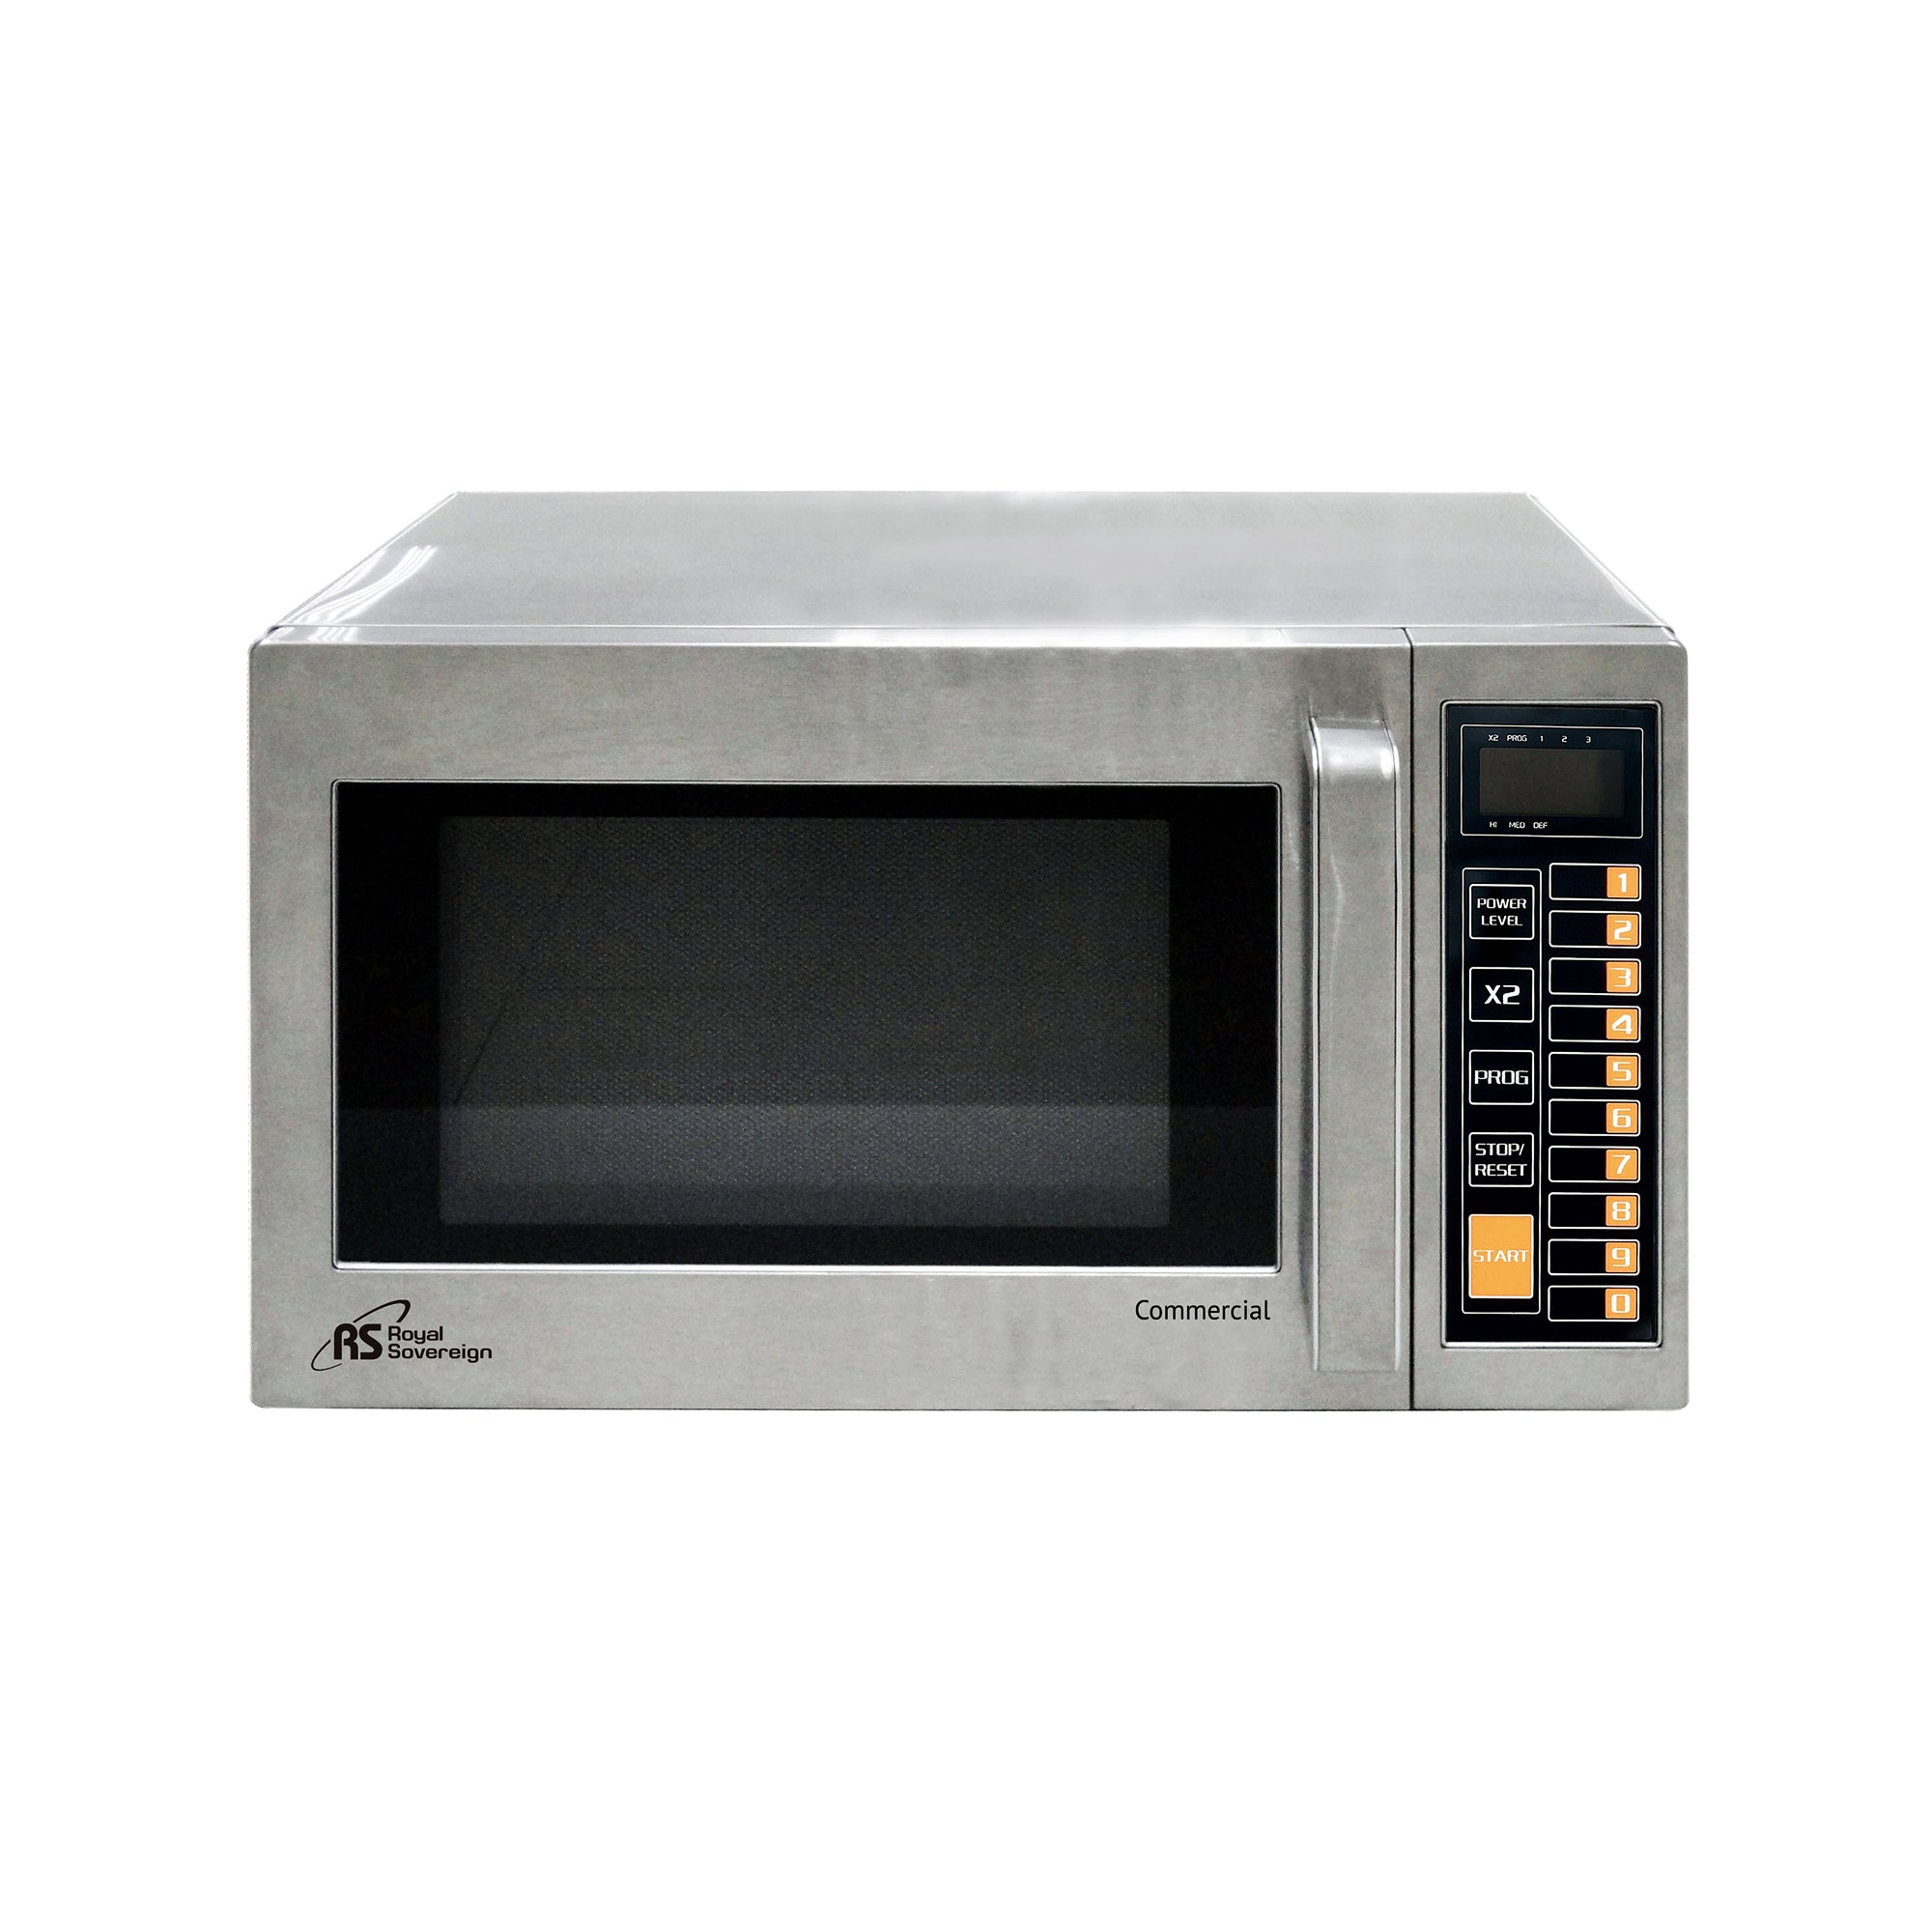 RCMW1000-25SS, 0.9 Cubic Ft, 1000W COMMERCIAL Microwave Oven